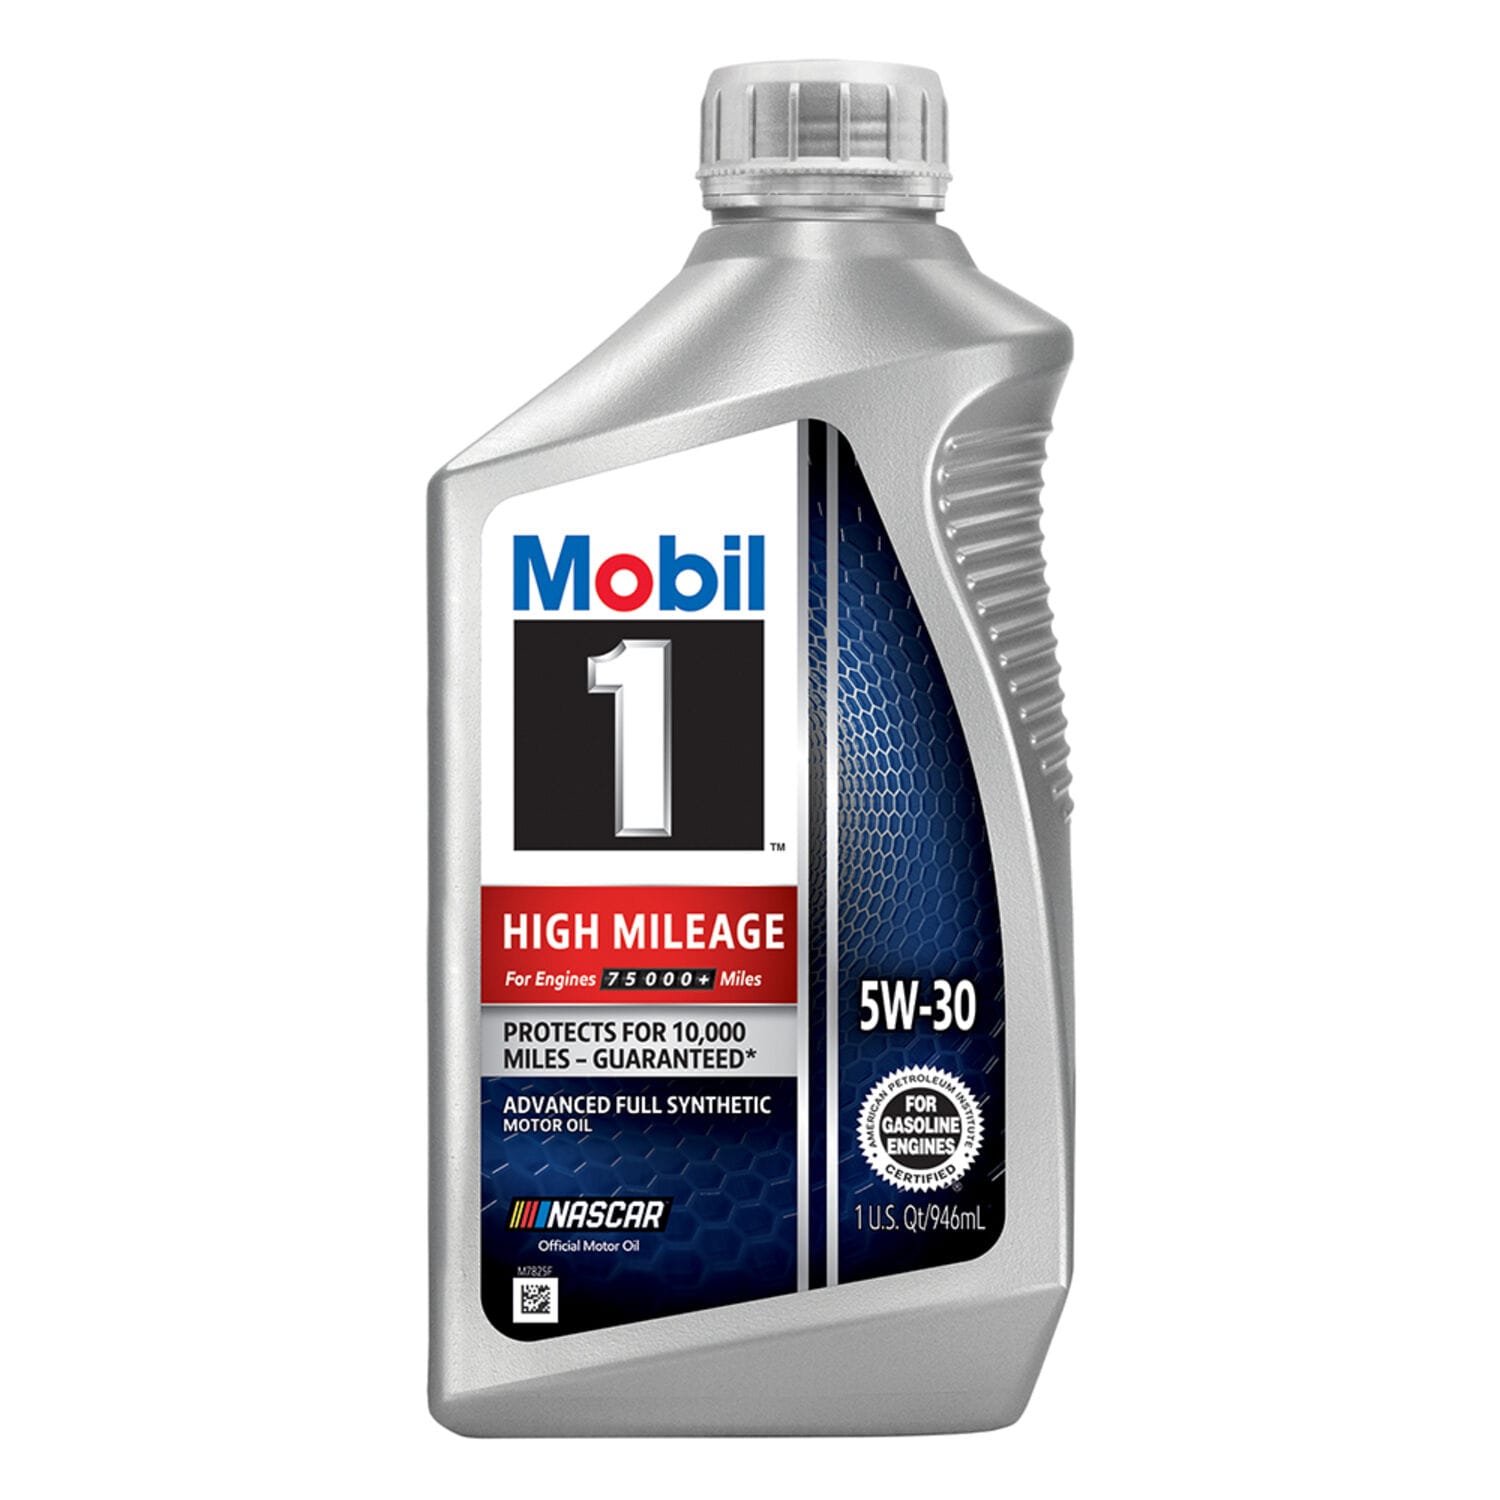 Mobil 1 High Mileage Synthetic 5W-30 Motor Oil - 1 Quart - Full